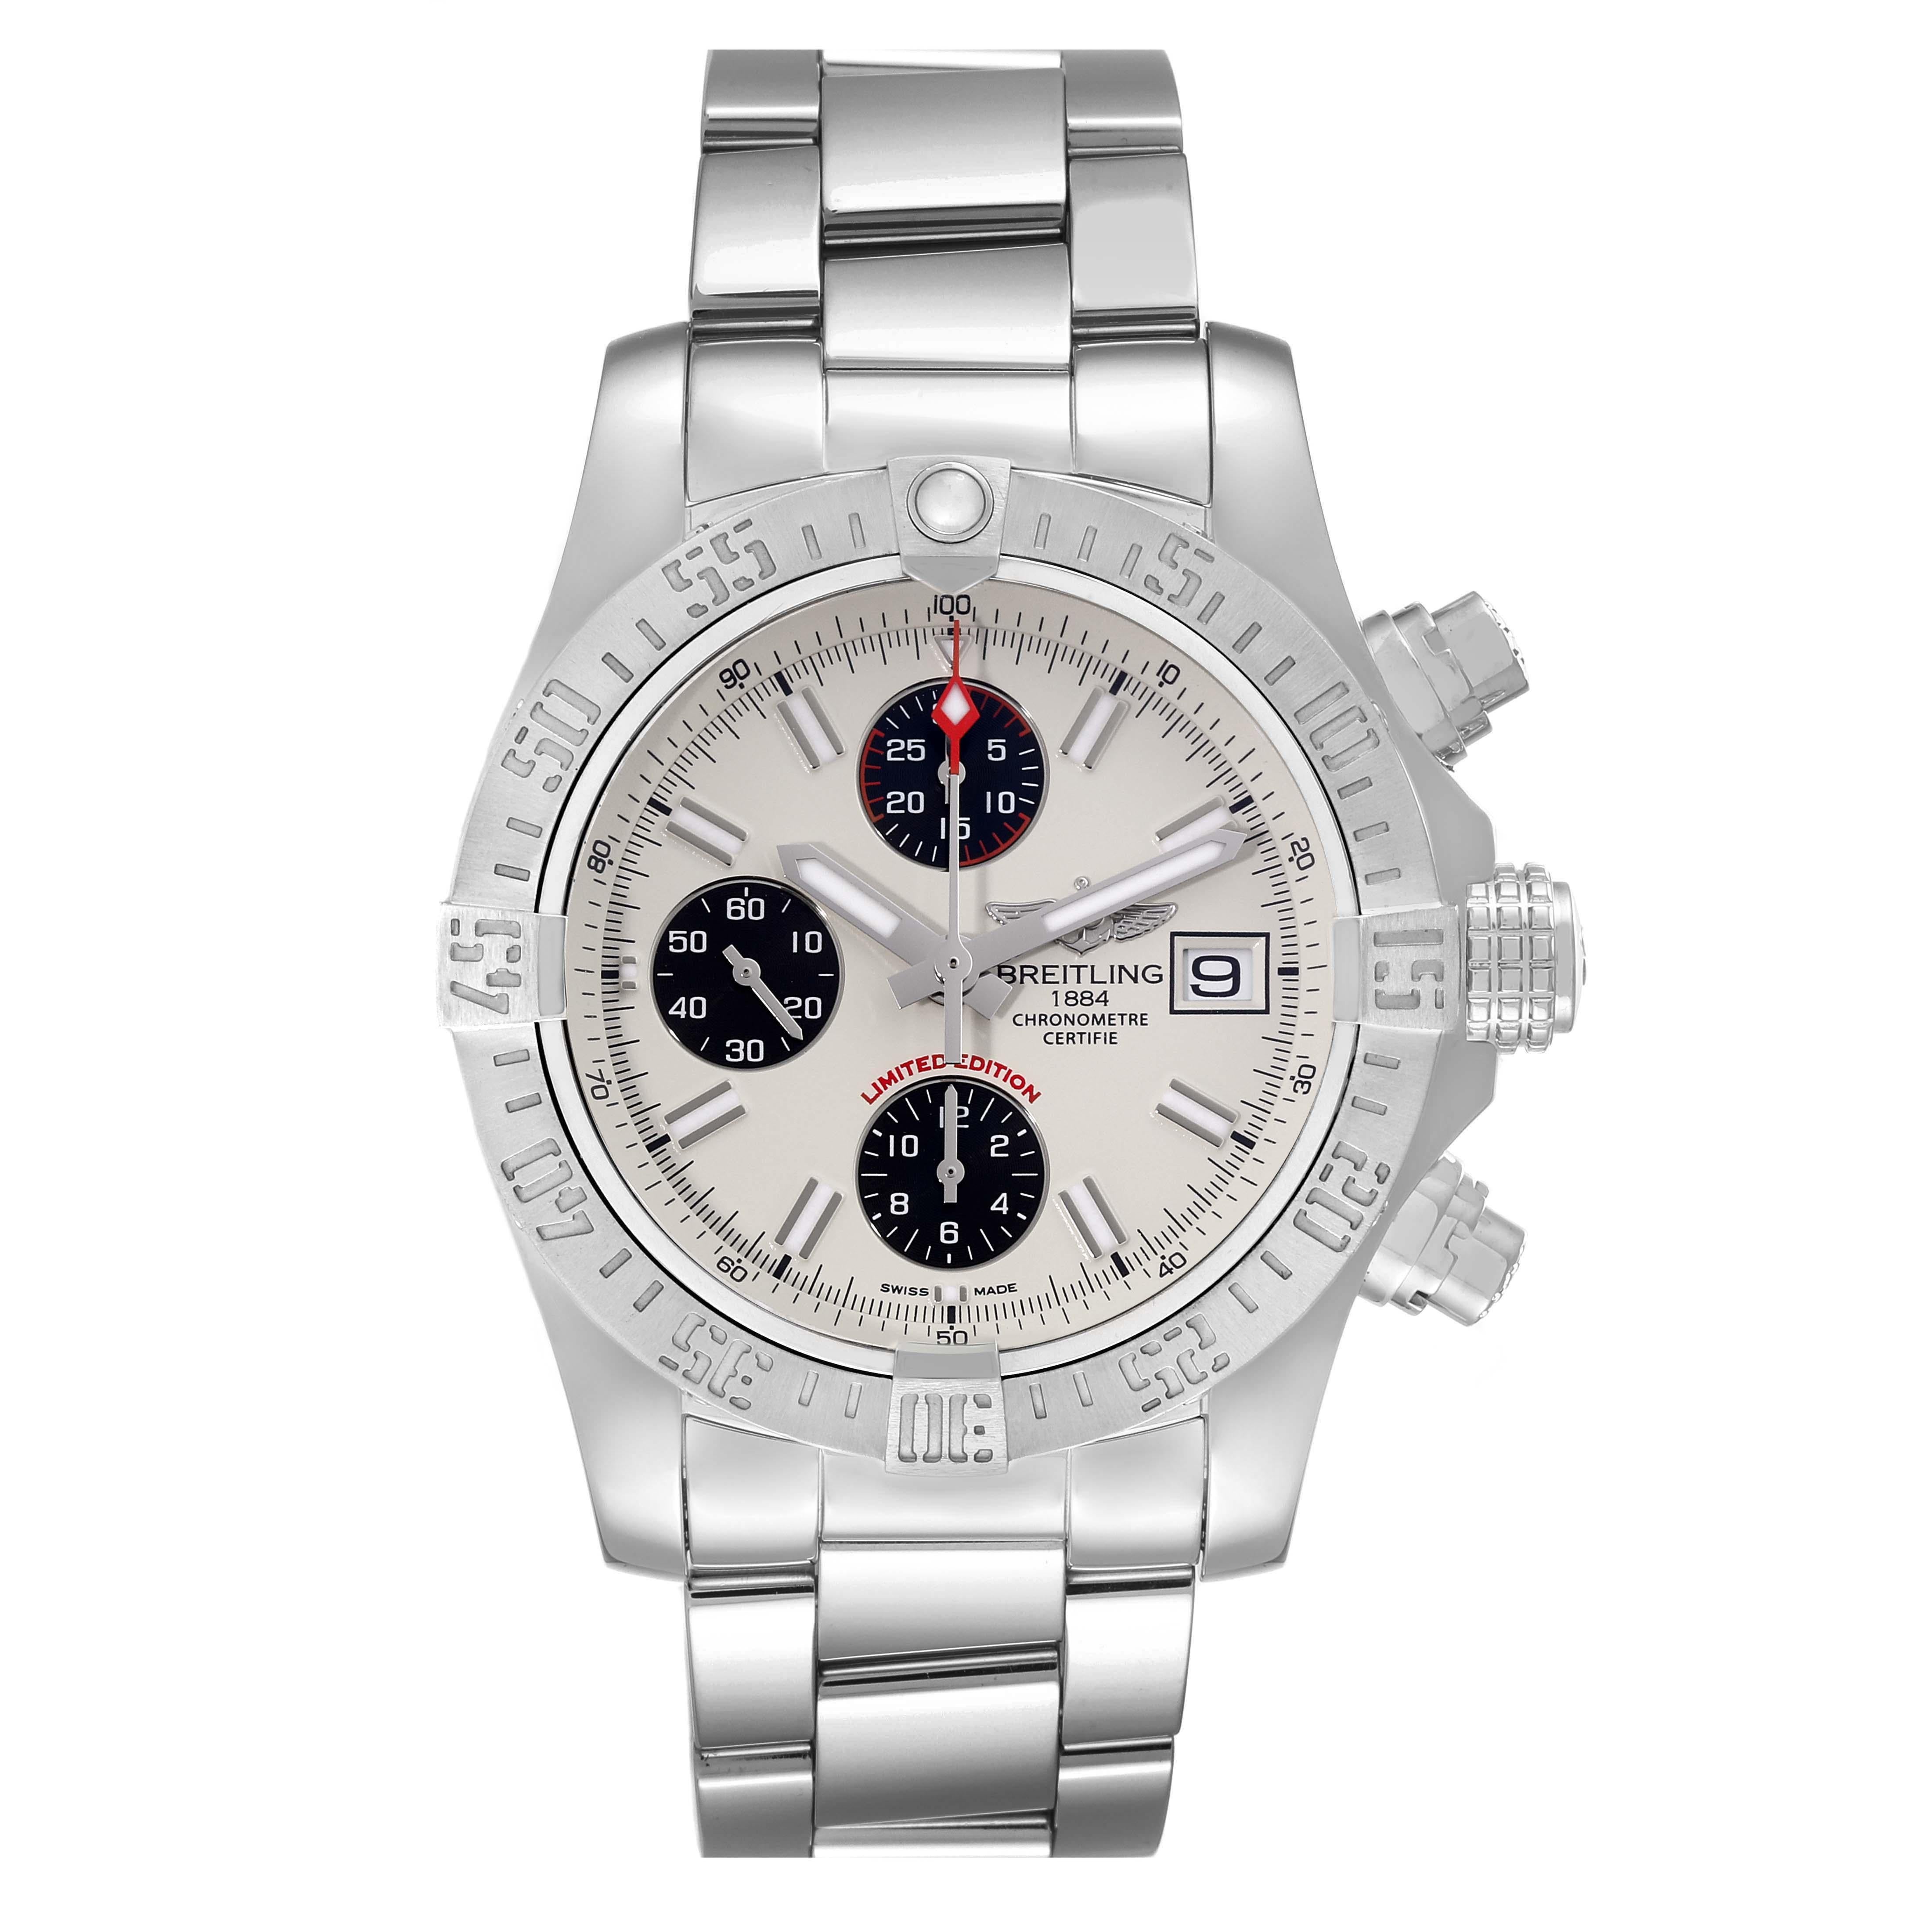 Breitling Avenger II White Dial Steel Mens Watch A13381 Box Card In Excellent Condition For Sale In Atlanta, GA